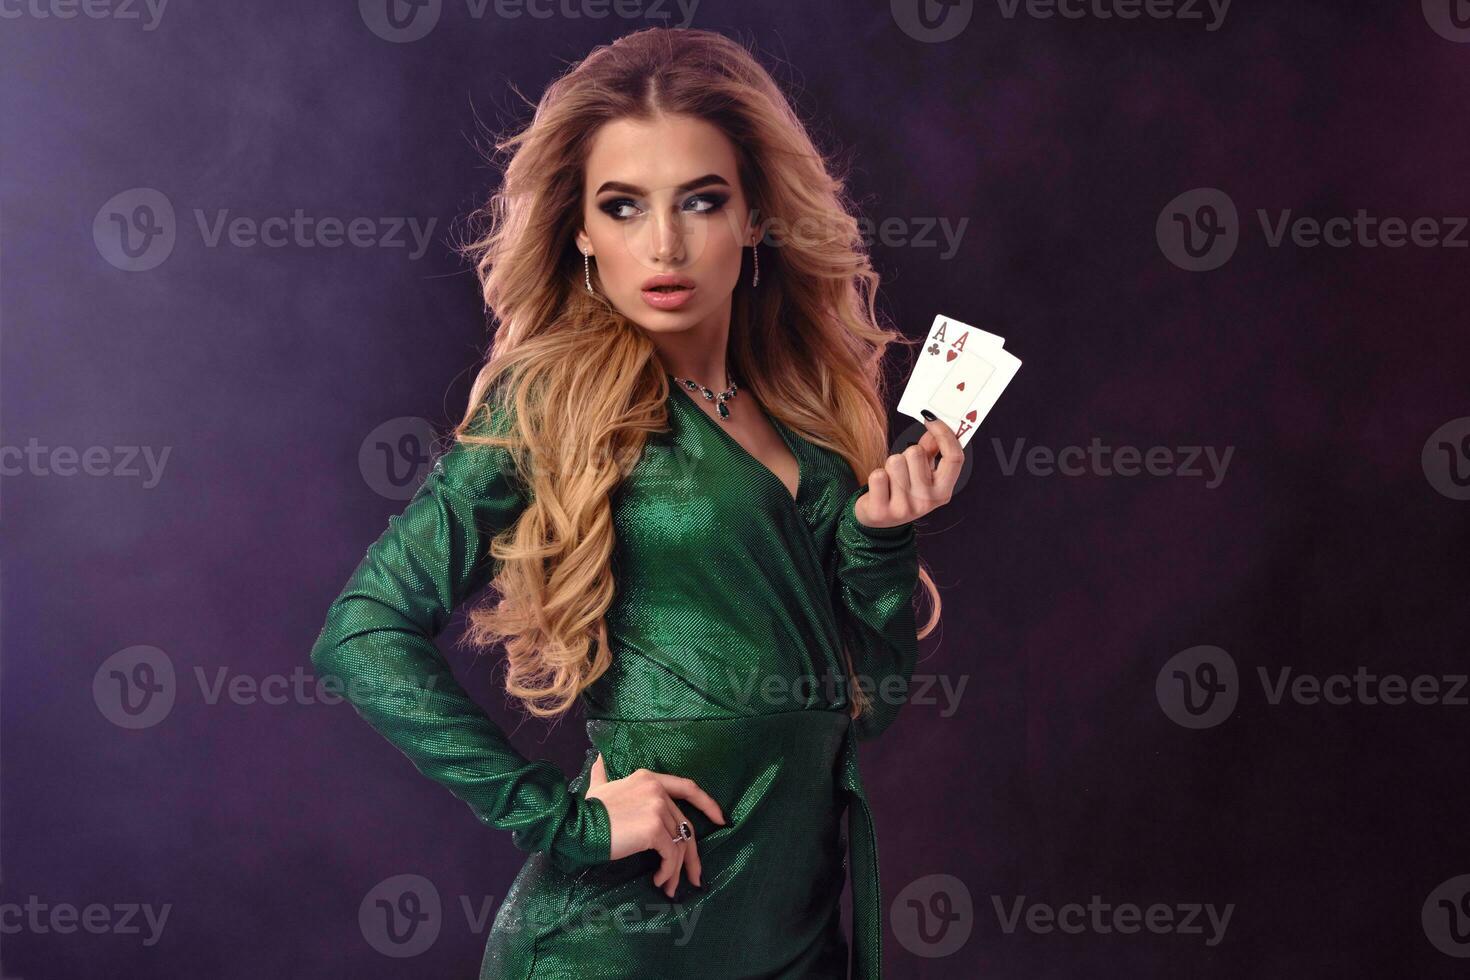 Blonde woman in green stylish dress and jewelry. Showing two playing cards, hand on waist, posing on purple smoky background. Poker, casino. Close-up photo